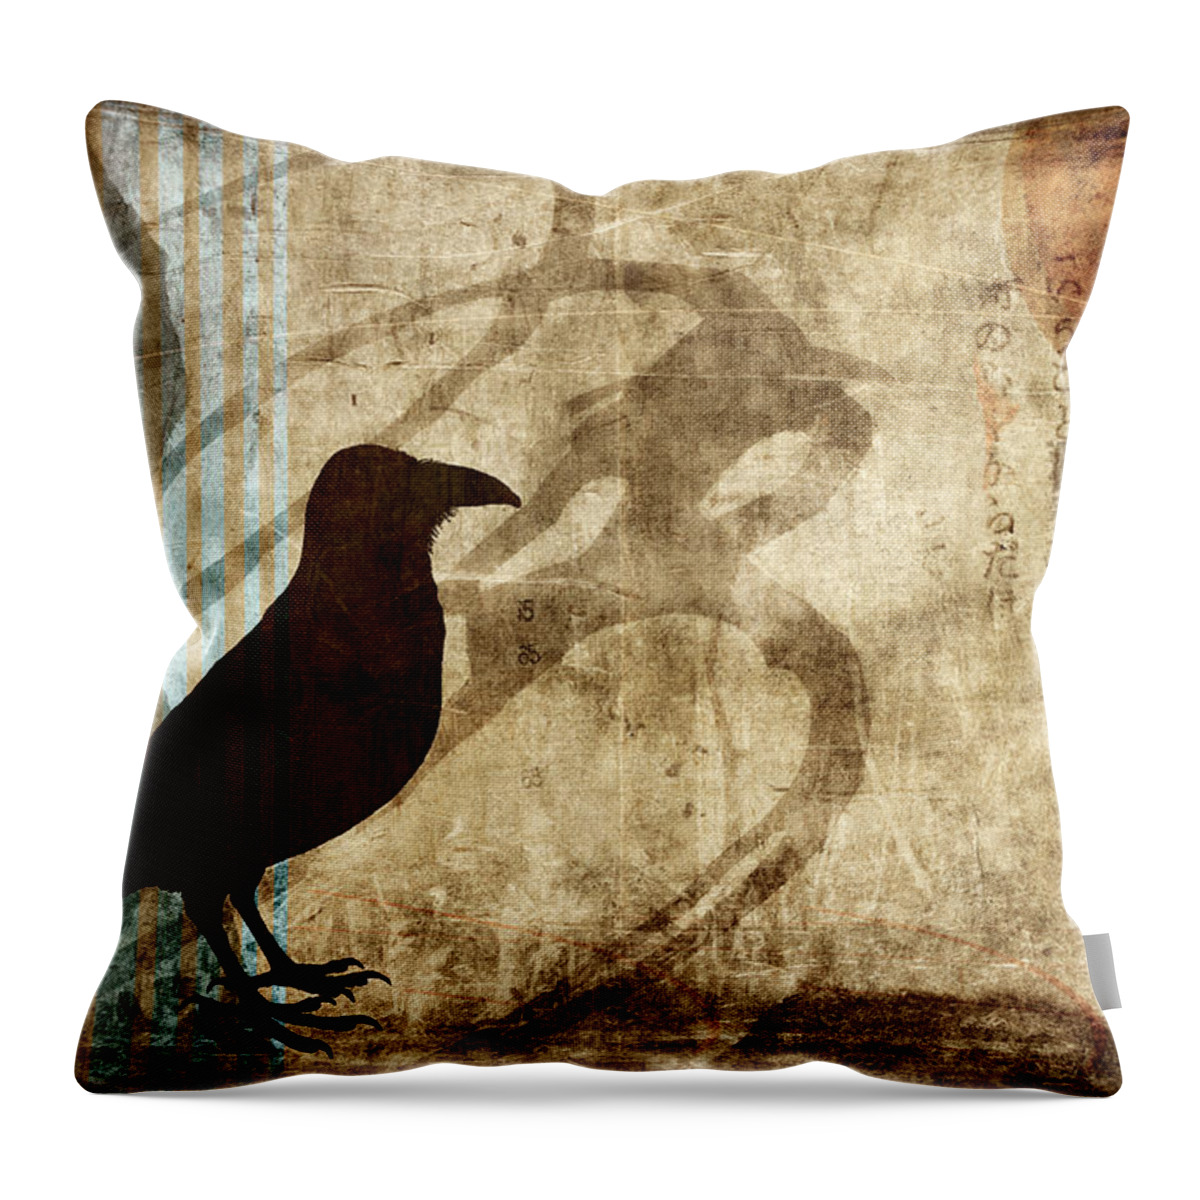 Raven Throw Pillow featuring the photograph Facing Future by Carol Leigh